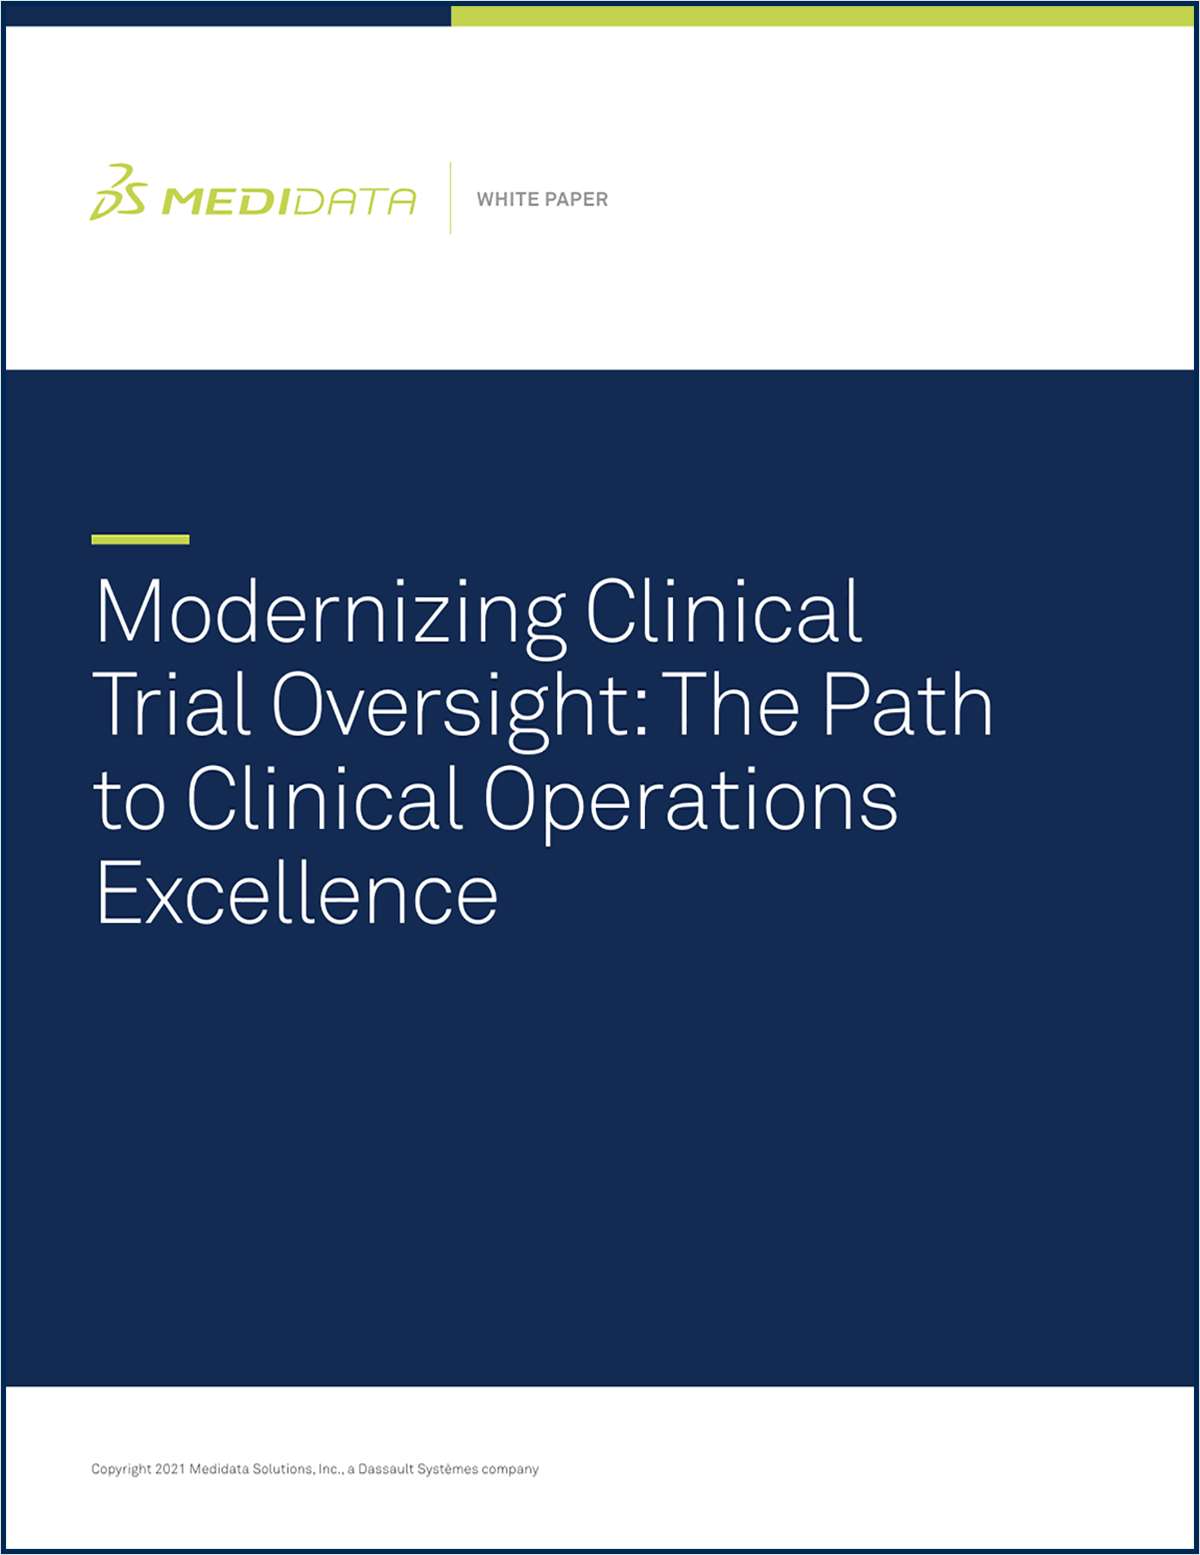 Modernizing Clinical Trial Oversight - The Path to Operations Excellence